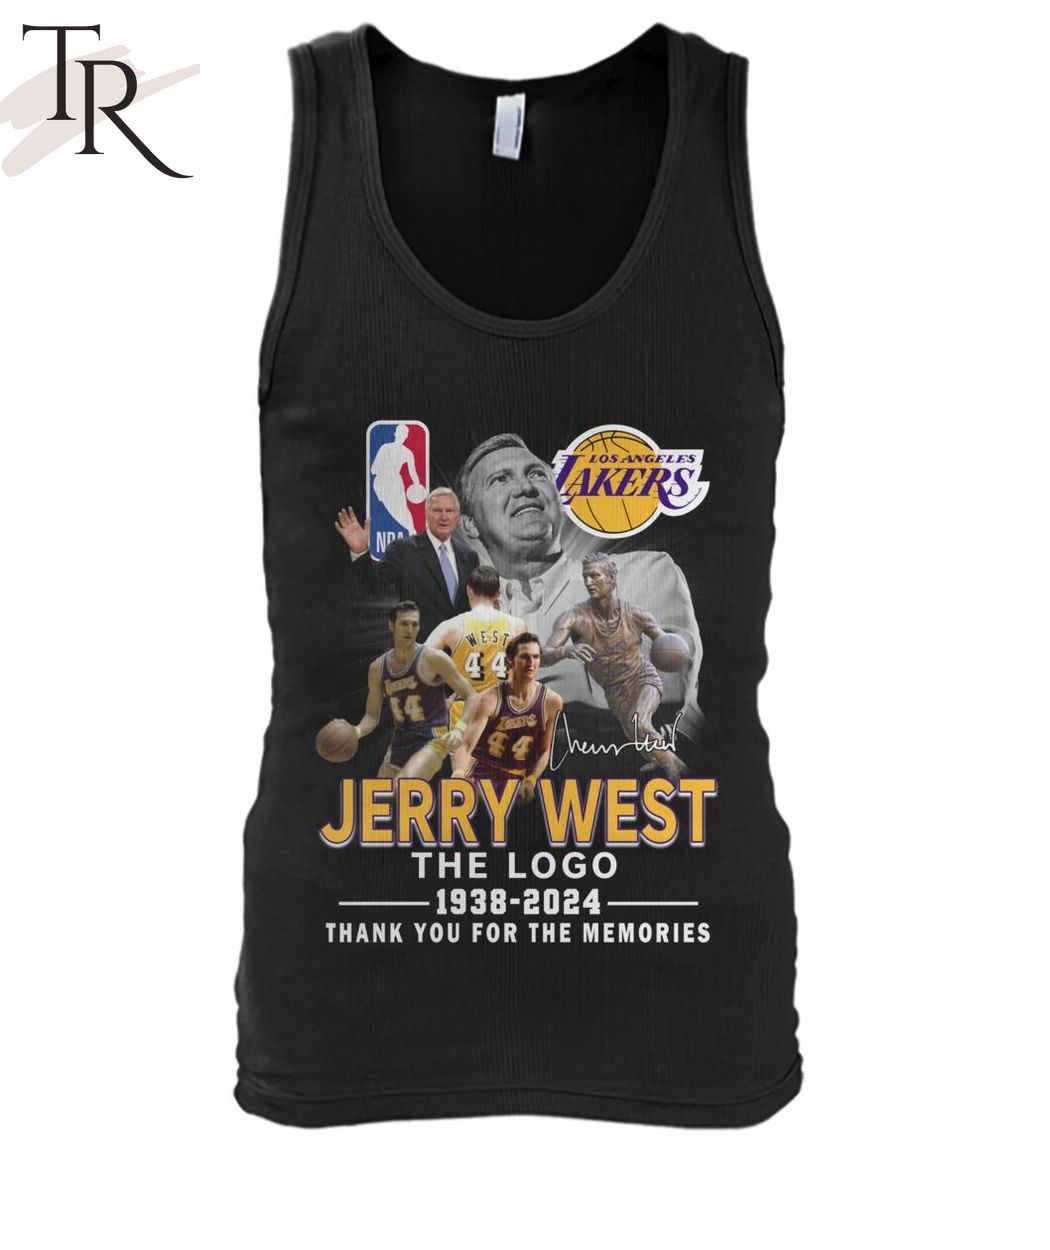 Jerry West The Logo 1938-2024 Thank You For The Memories T-Shirt